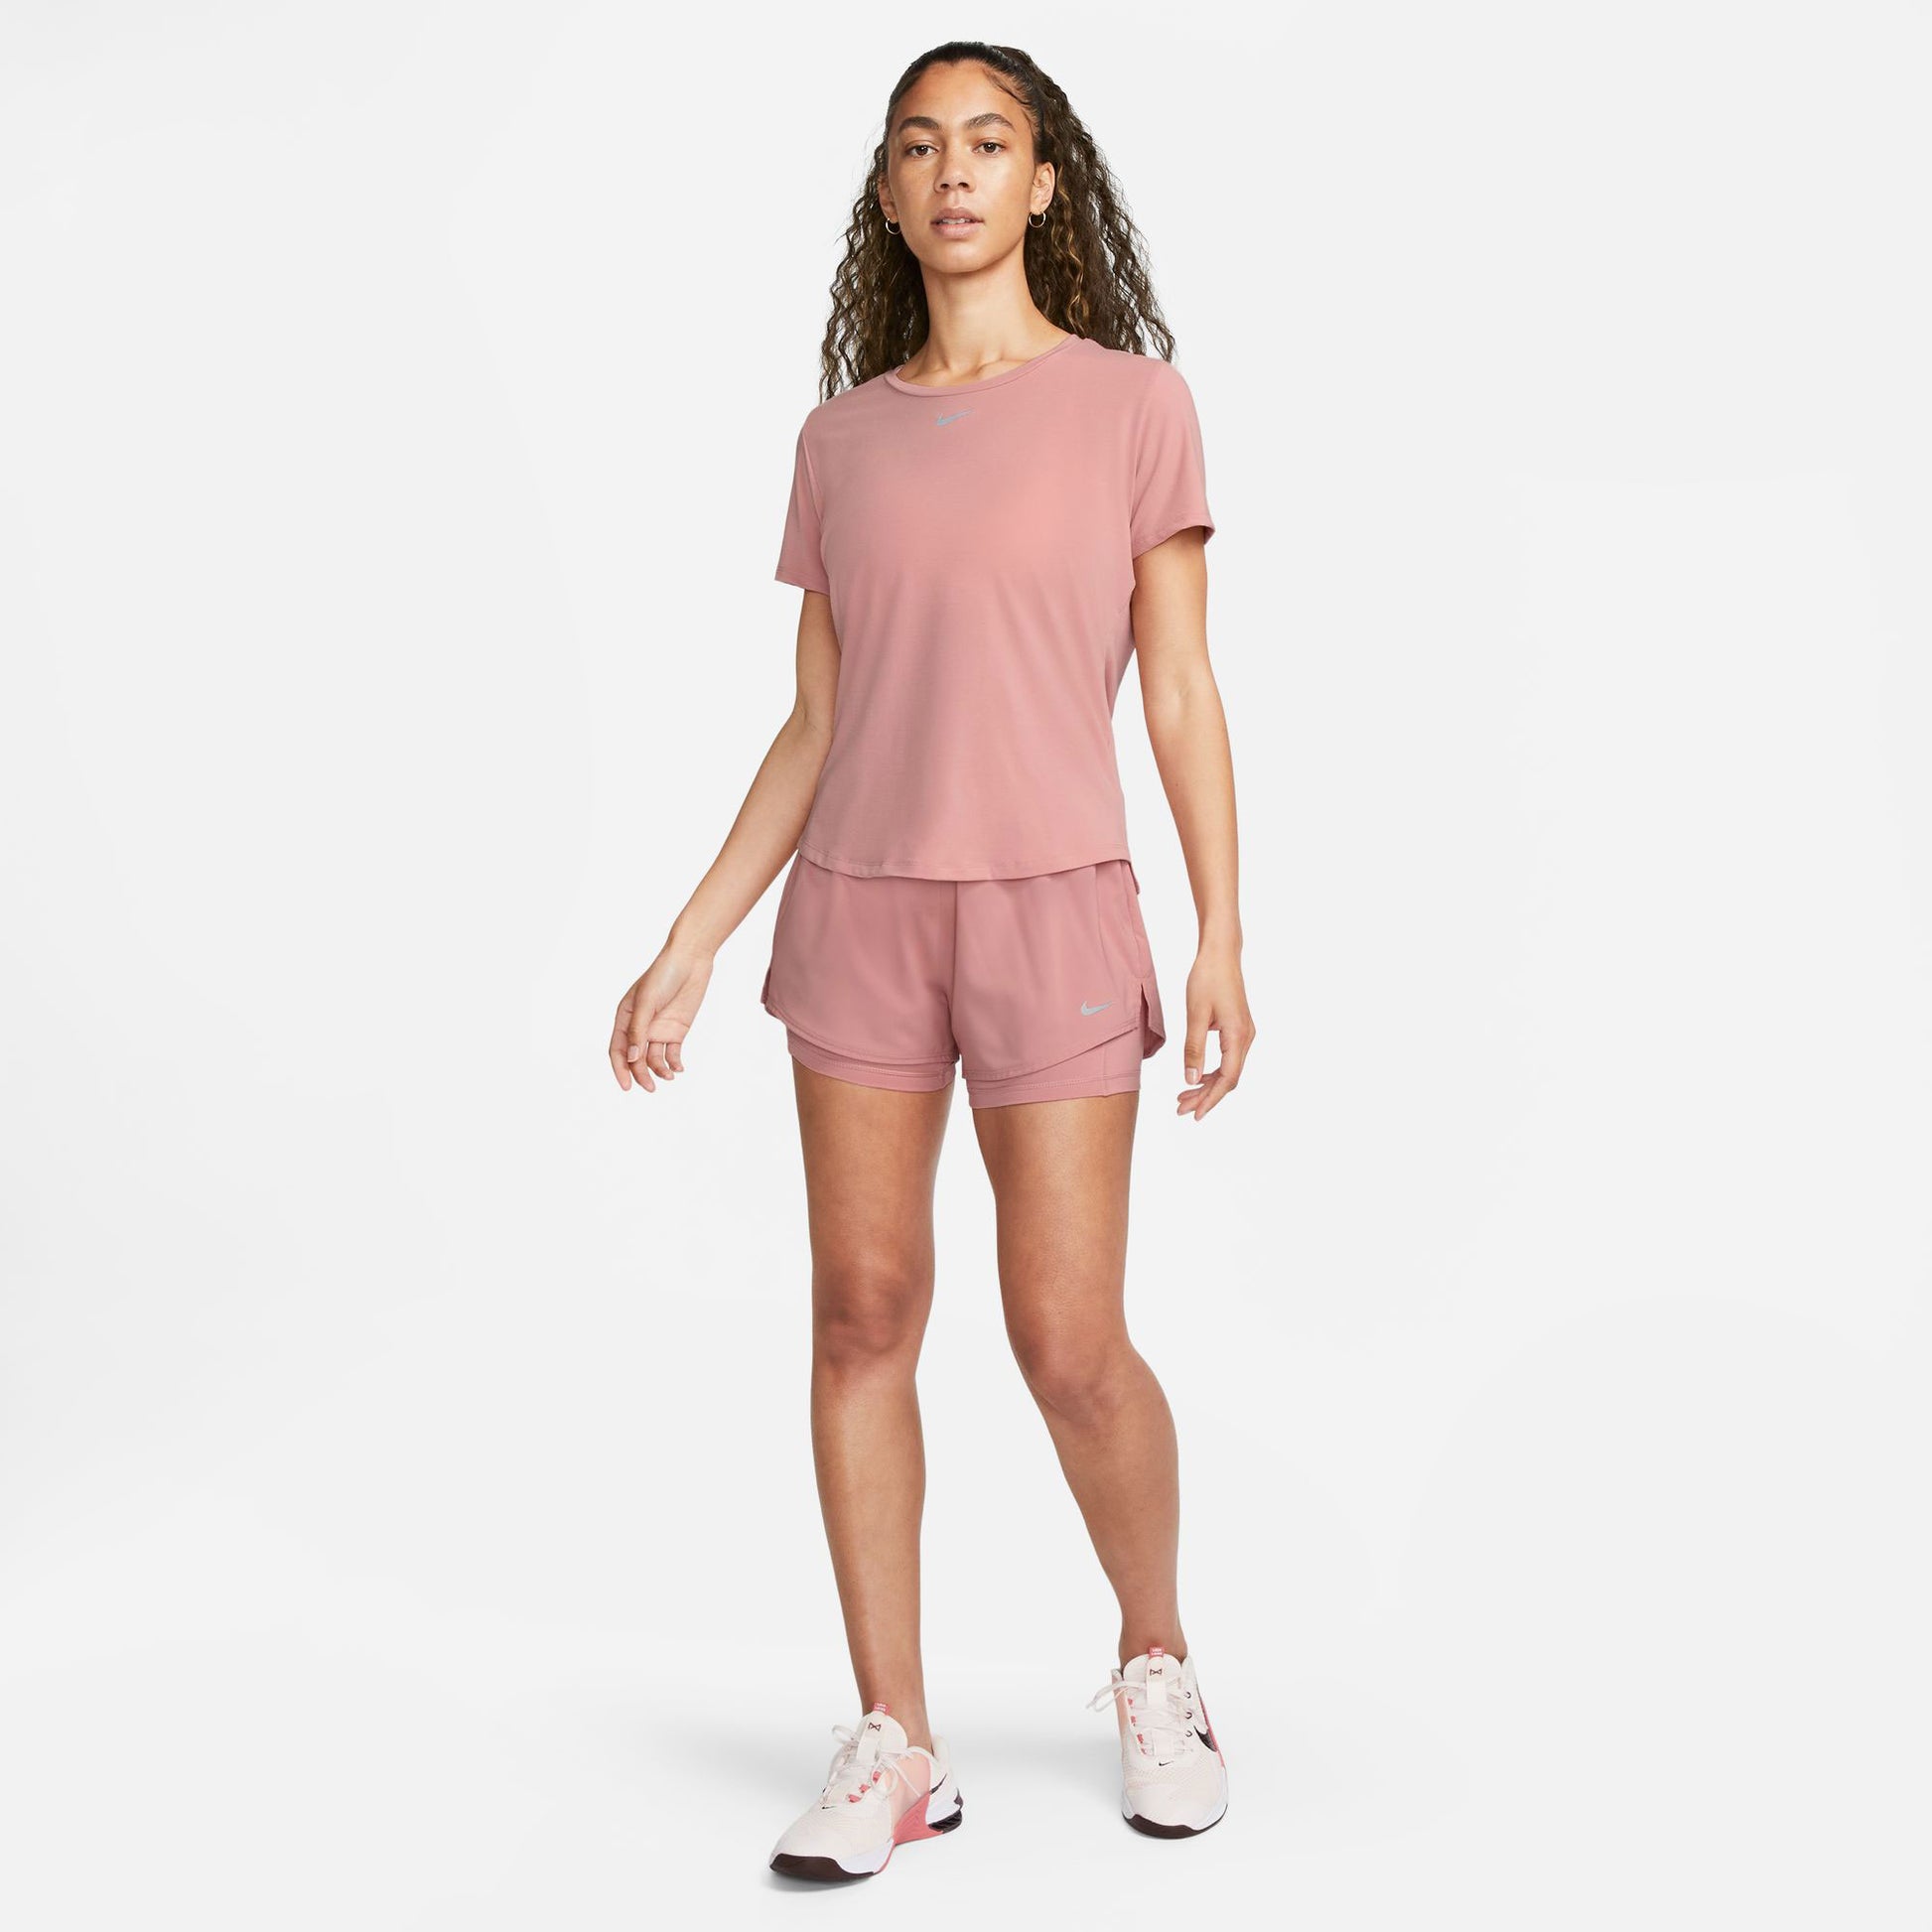 Nike One Luxe Dri-FIT Women's Standard Fit Shirt Pink (5)